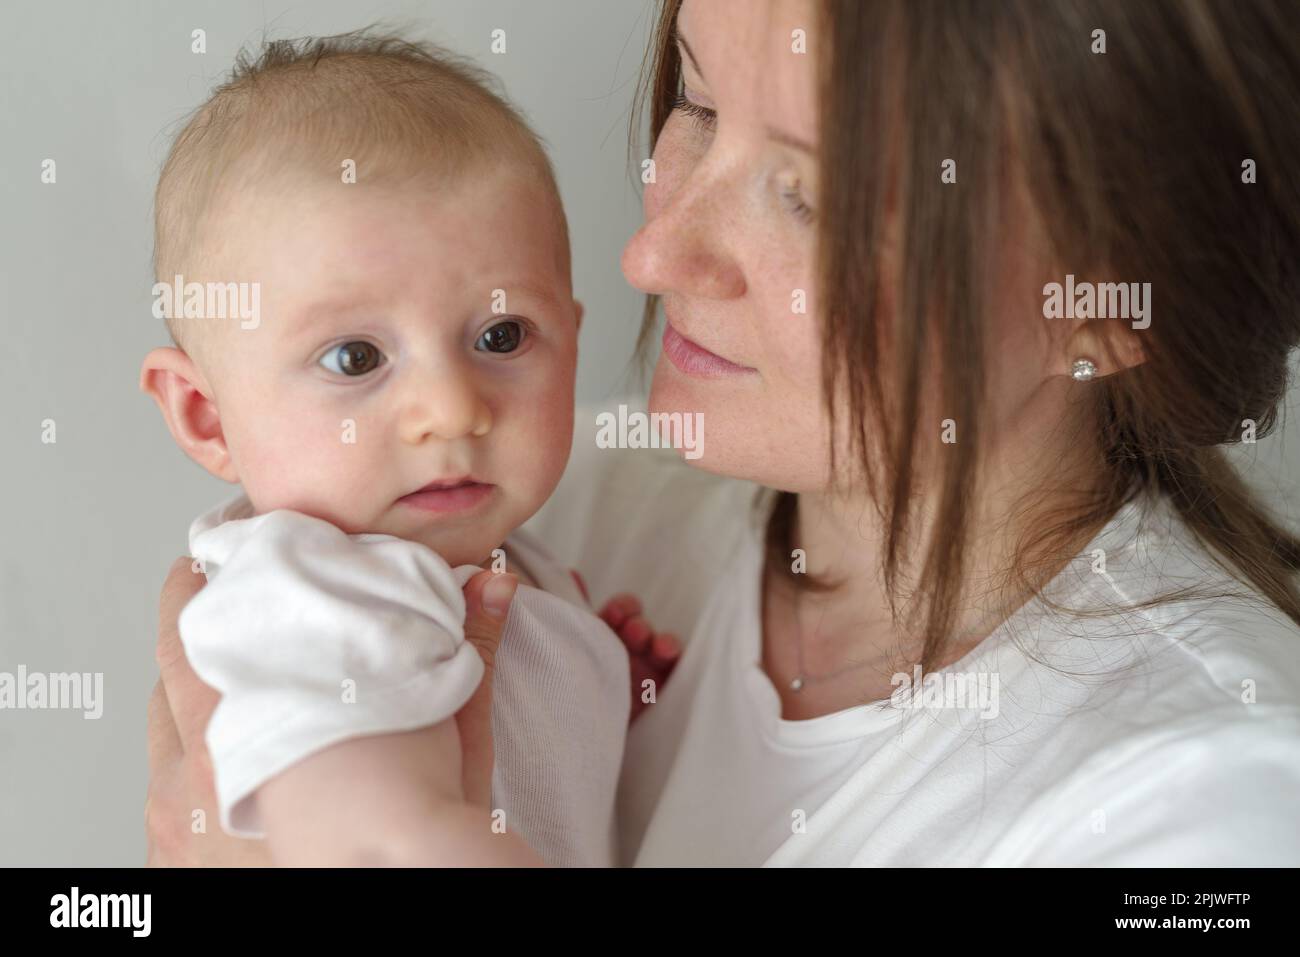 Loving and affectionate mother holding newborn baby Stock Photo